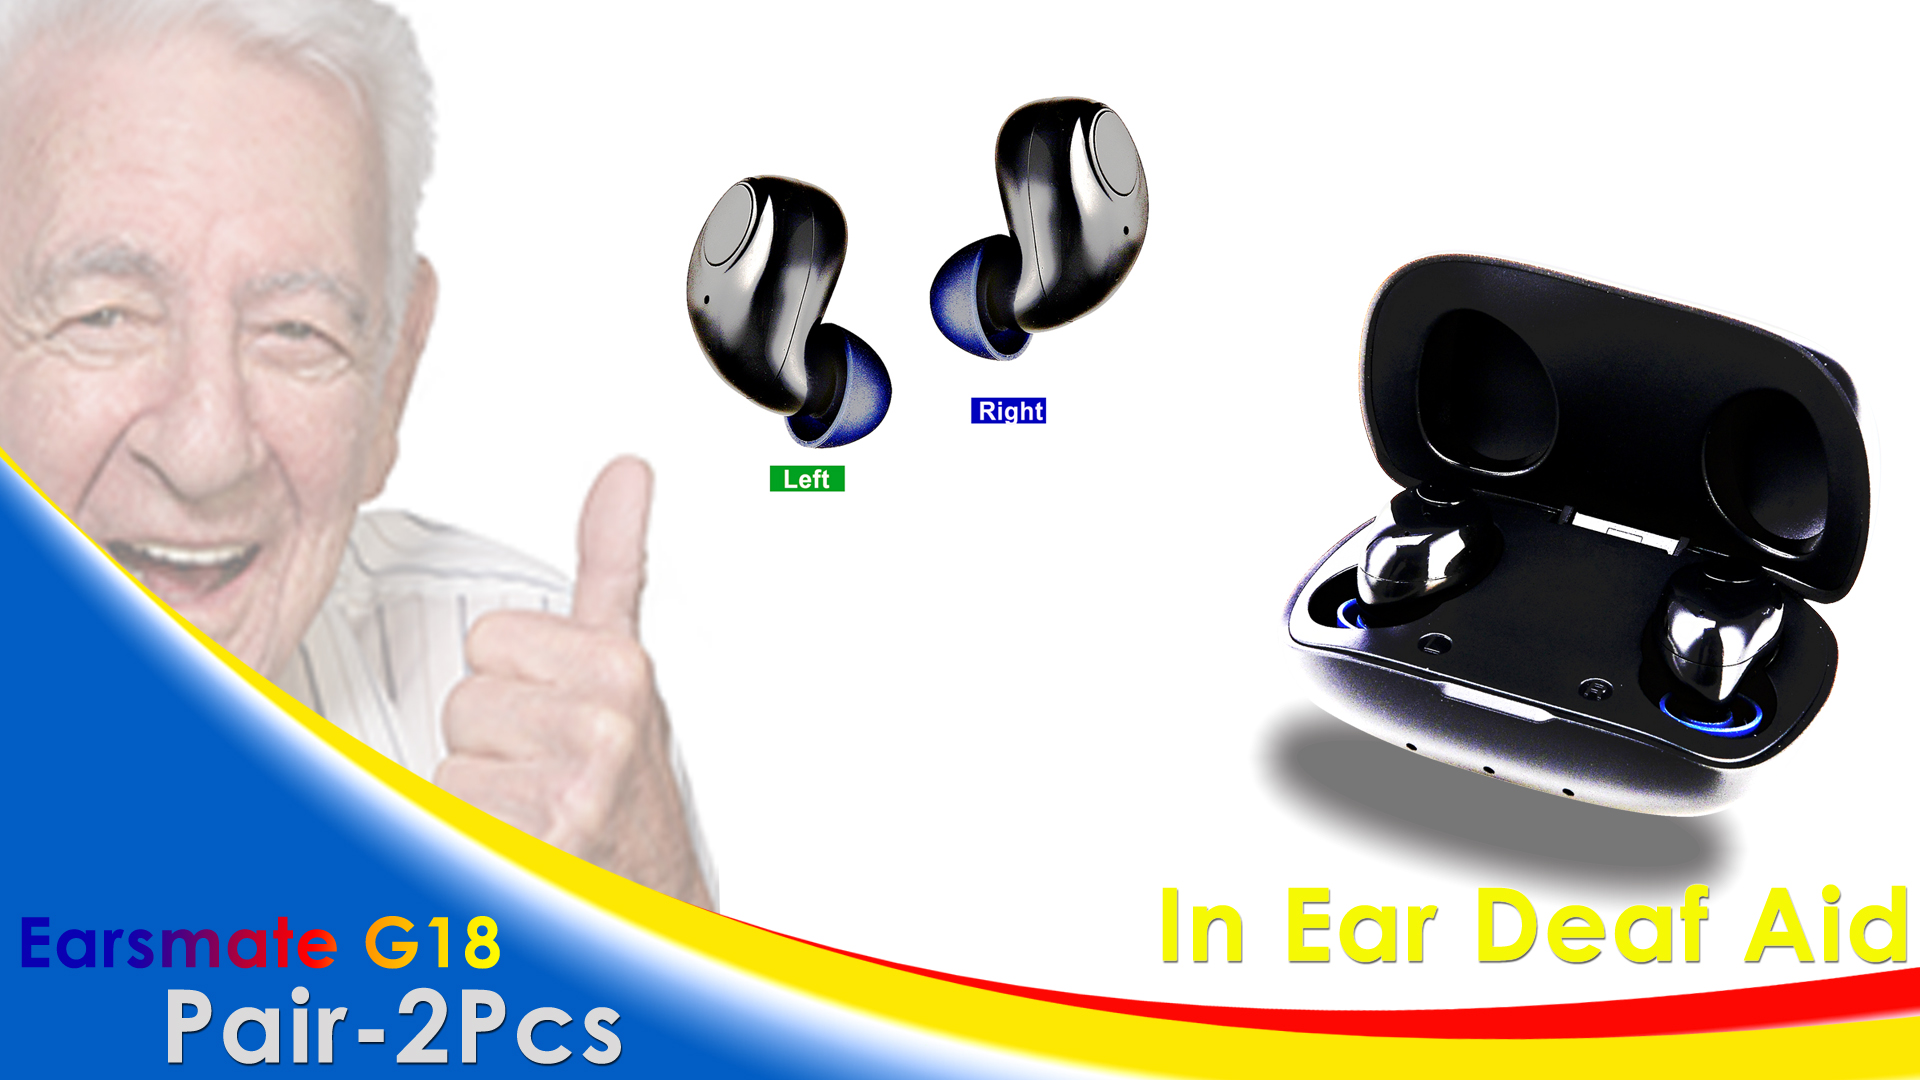  Small USB Portable Charge box Mini CIC Rechargeable Hearing Aids on Sale Amazon for Both Ears 2Pcs